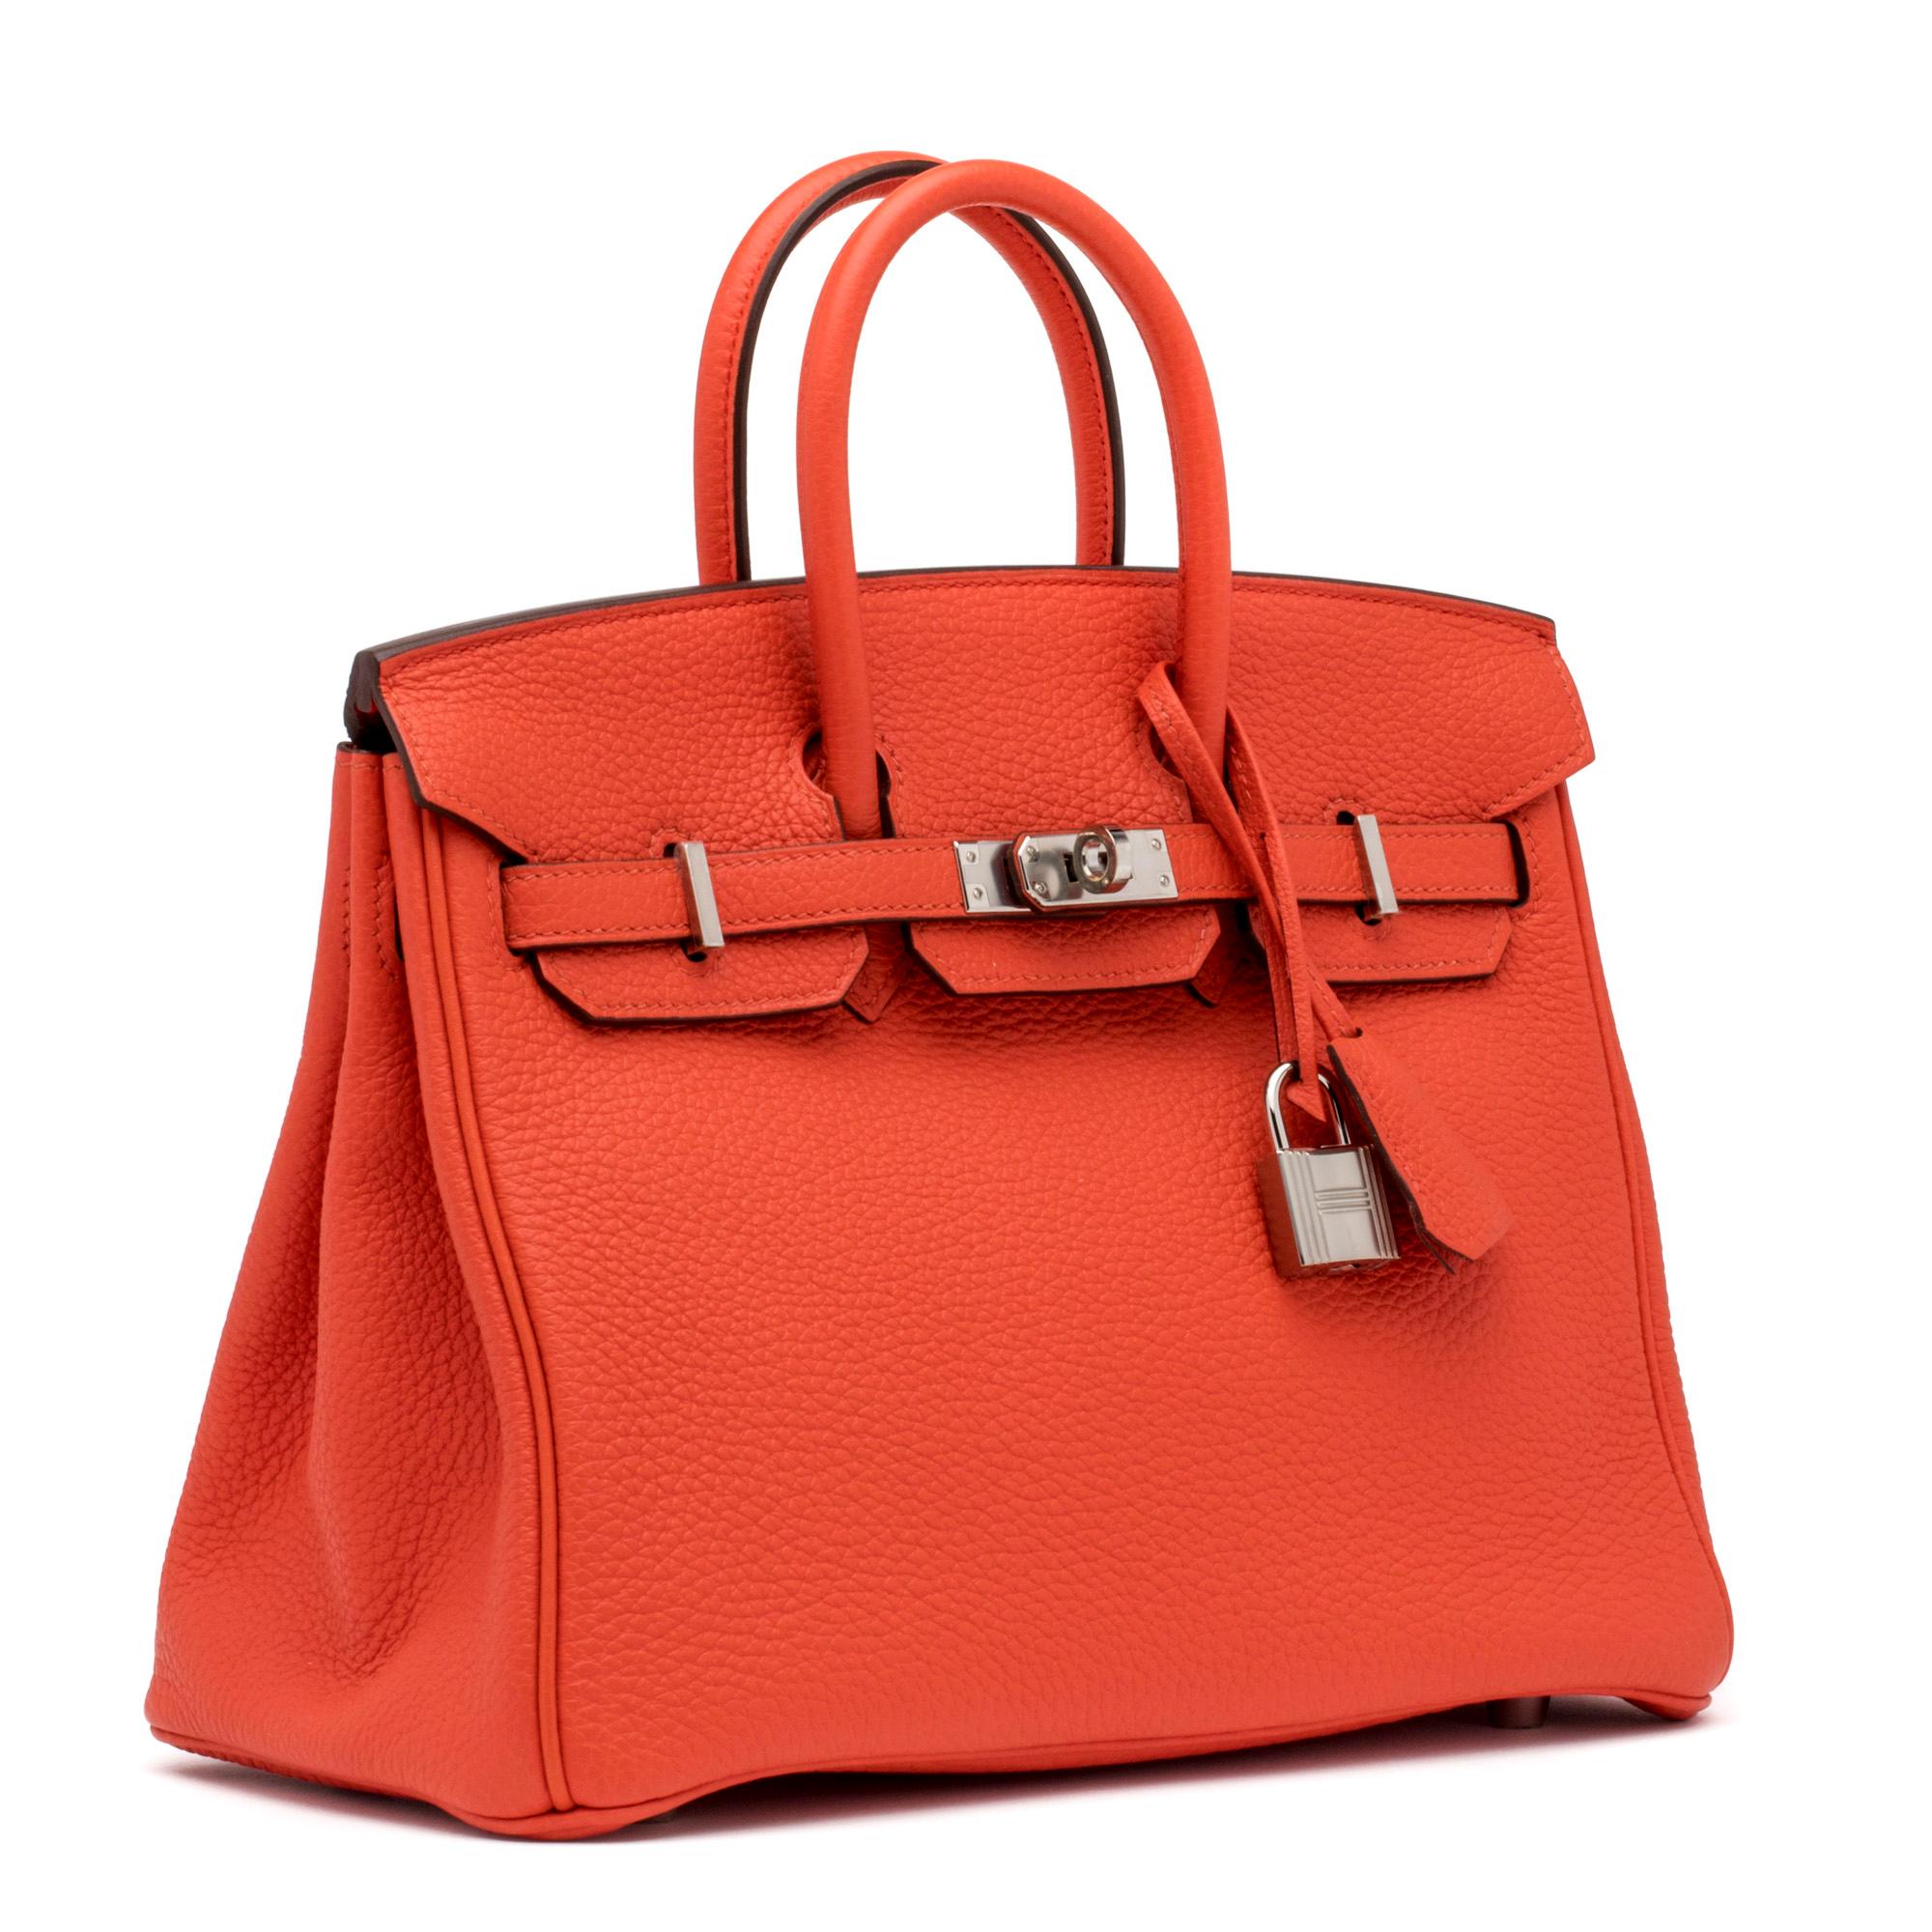 The Hermés Birkin bag embodies the quintessence of style and luxury due to its impeccable design, craftsmanship, and significance. That being said, it is the most iconic and desired piece from the Hermés handbag collection.